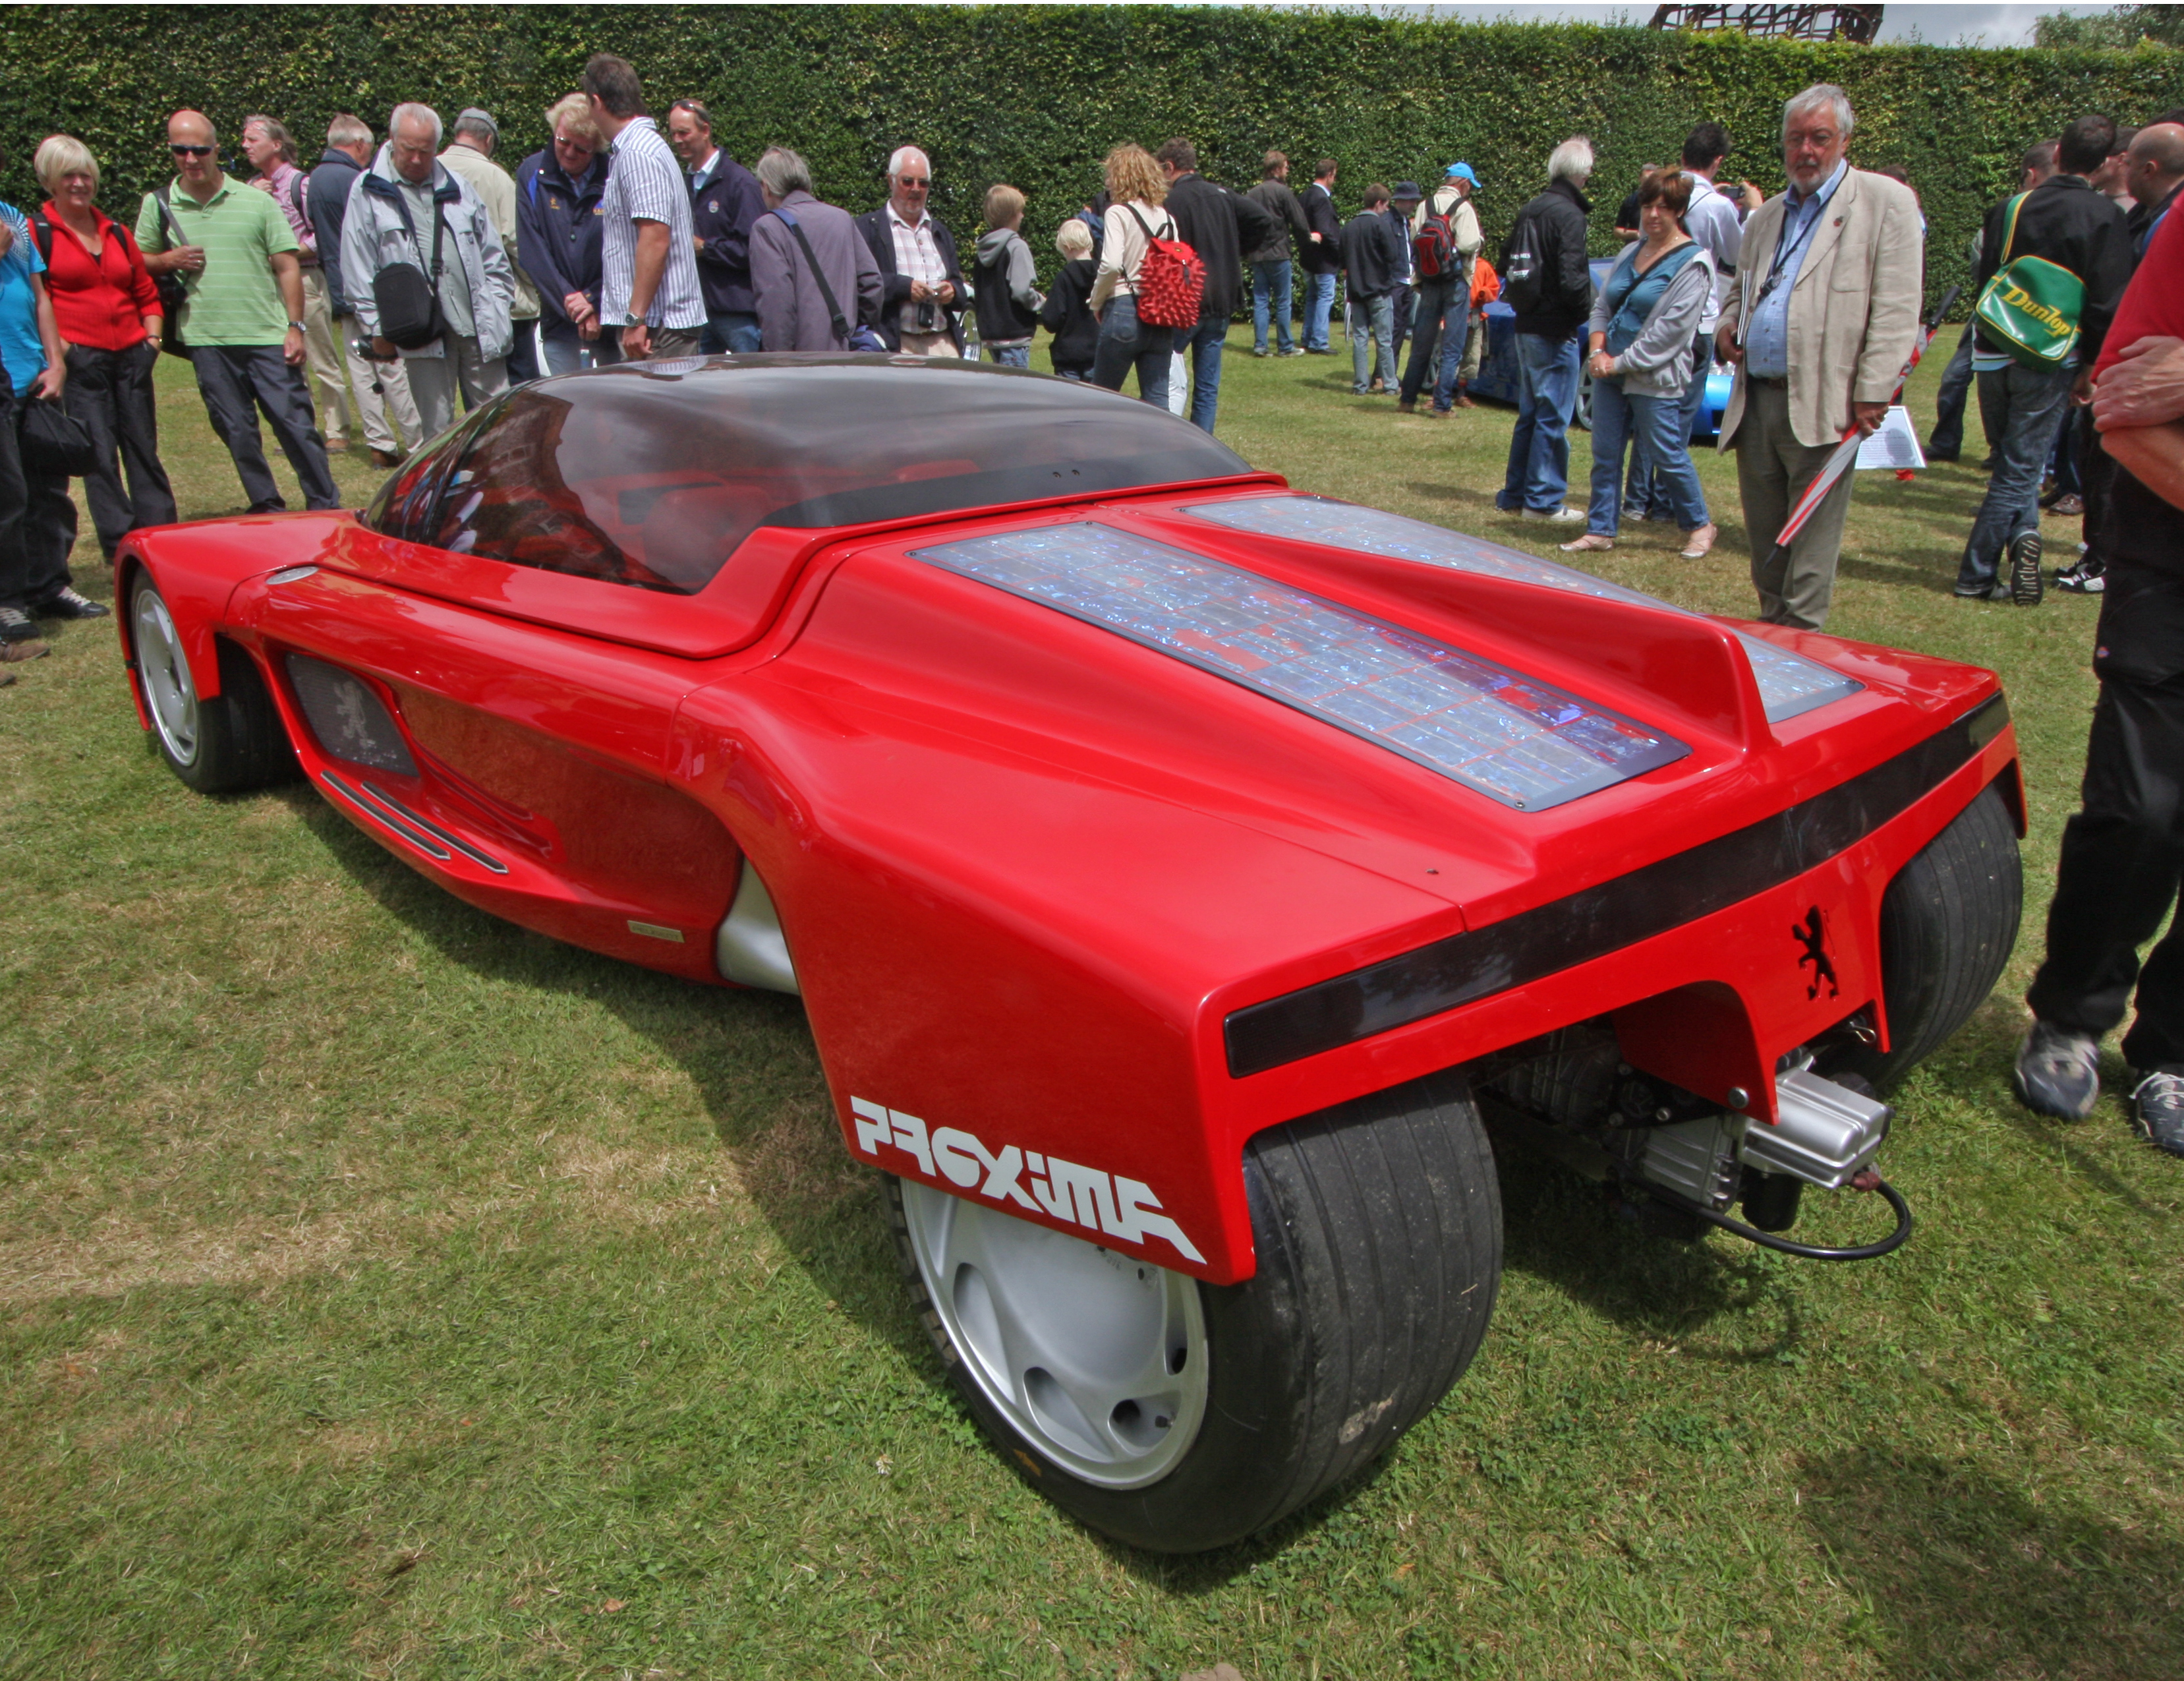 1986 Peugeot Proxima - Flickr - exfordy